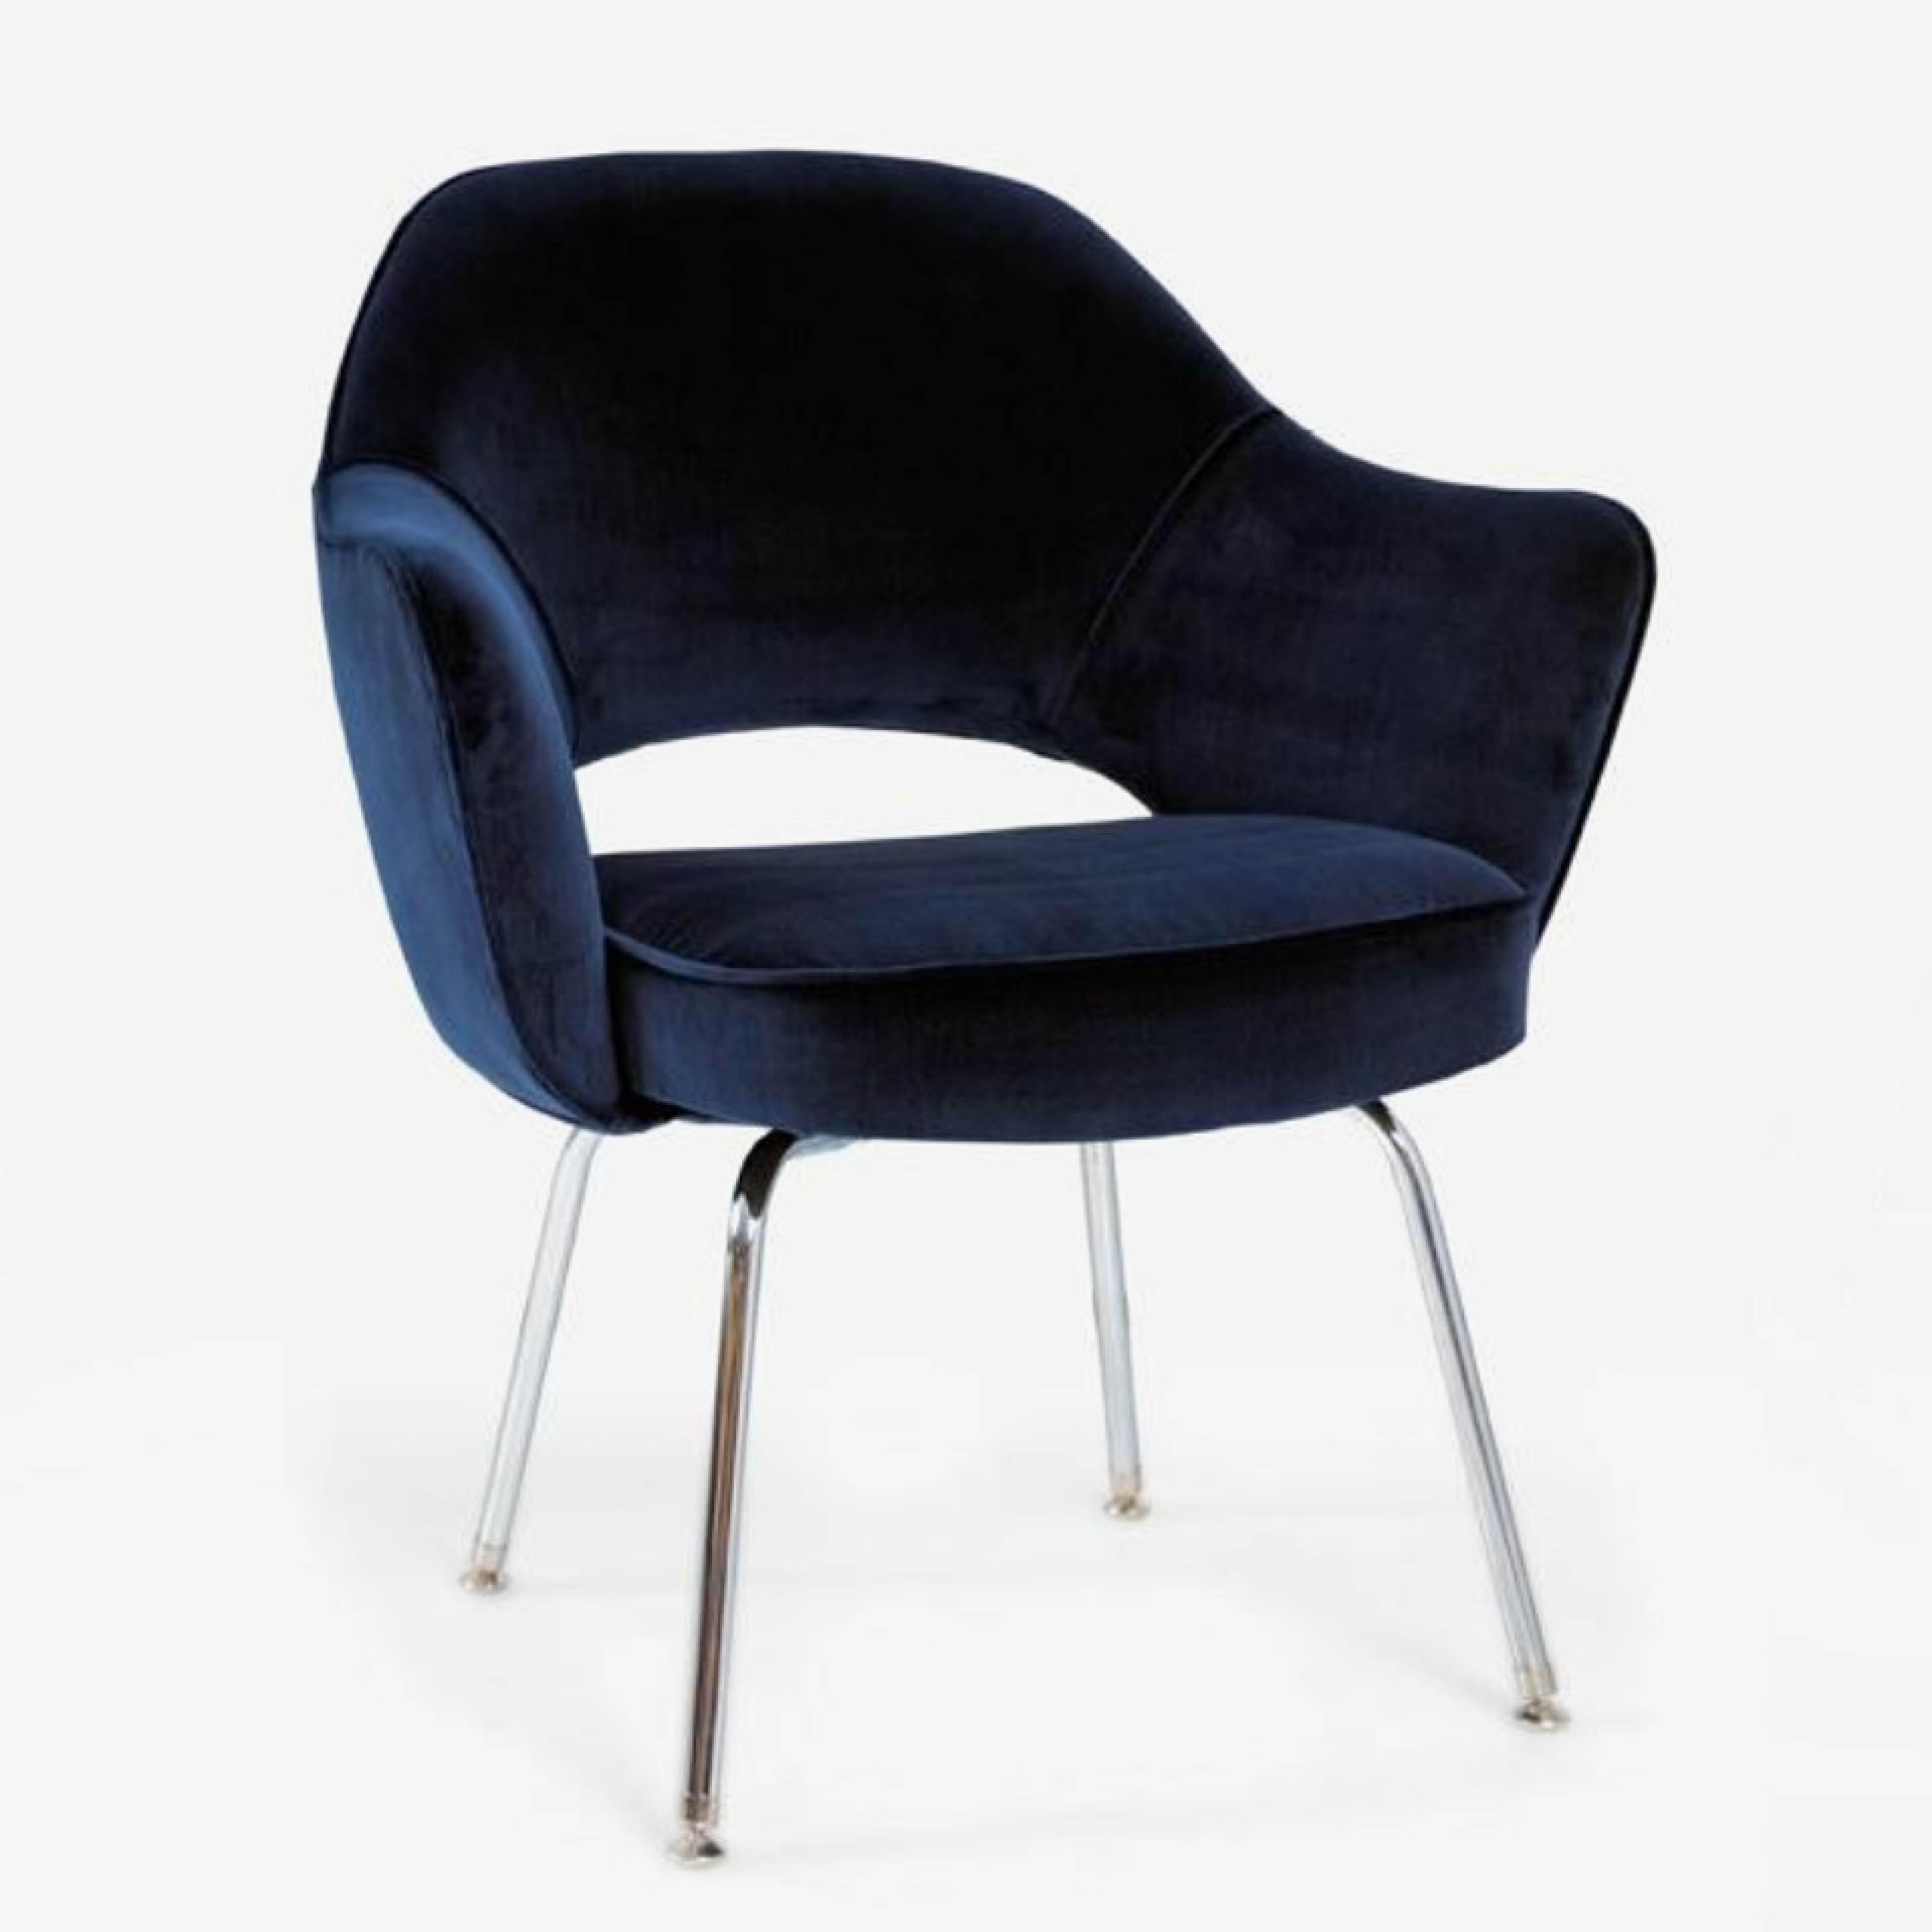 The Mid-Century Classic Vintage Eero Saarinen Executive Armchair, manufactured by Knoll Furniture, offered here as a set of 6. Custom upholstered in a deep 100% cotton Italian performance velvet in stunning Royal Blue. All restoration is executed in